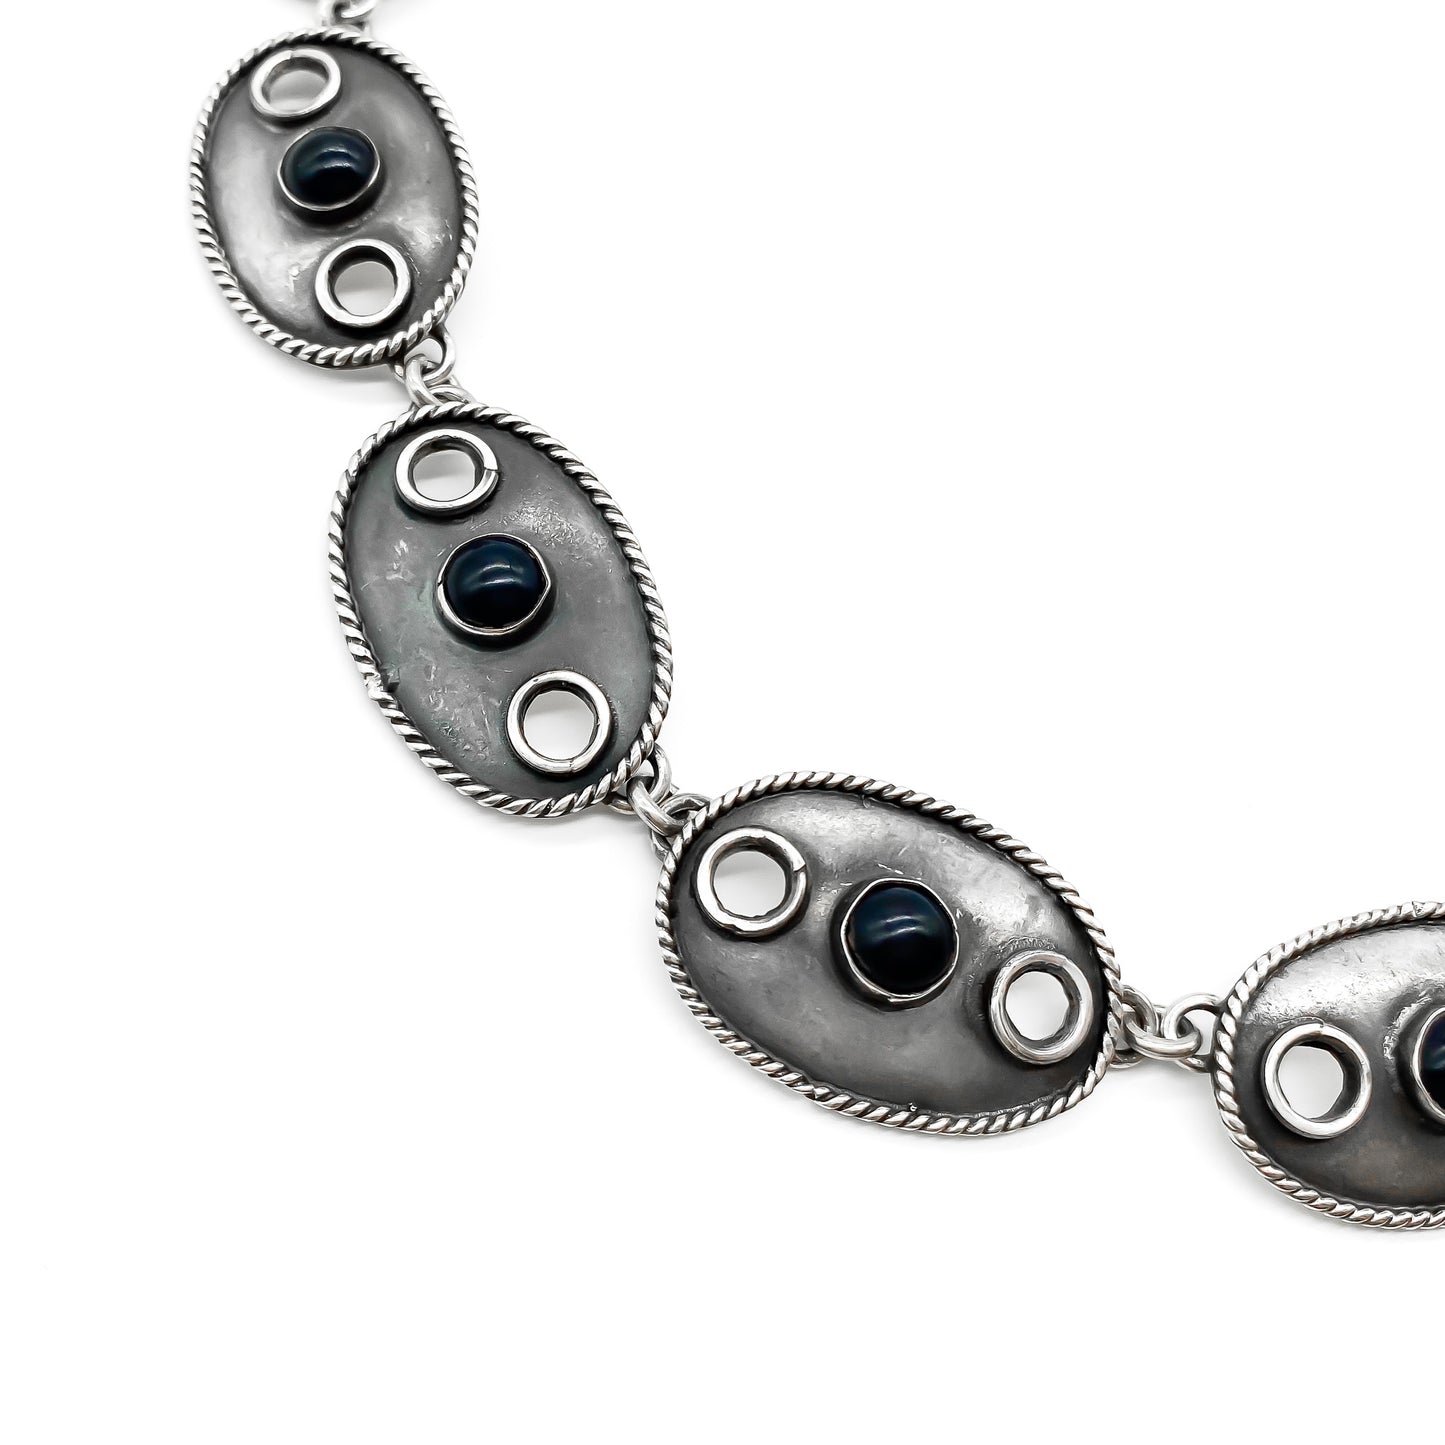 Stylish oxidised vintage sterling silver Mexican necklace consisting of eleven oval links, each set with a dark blue cabochon stone. Post 1980